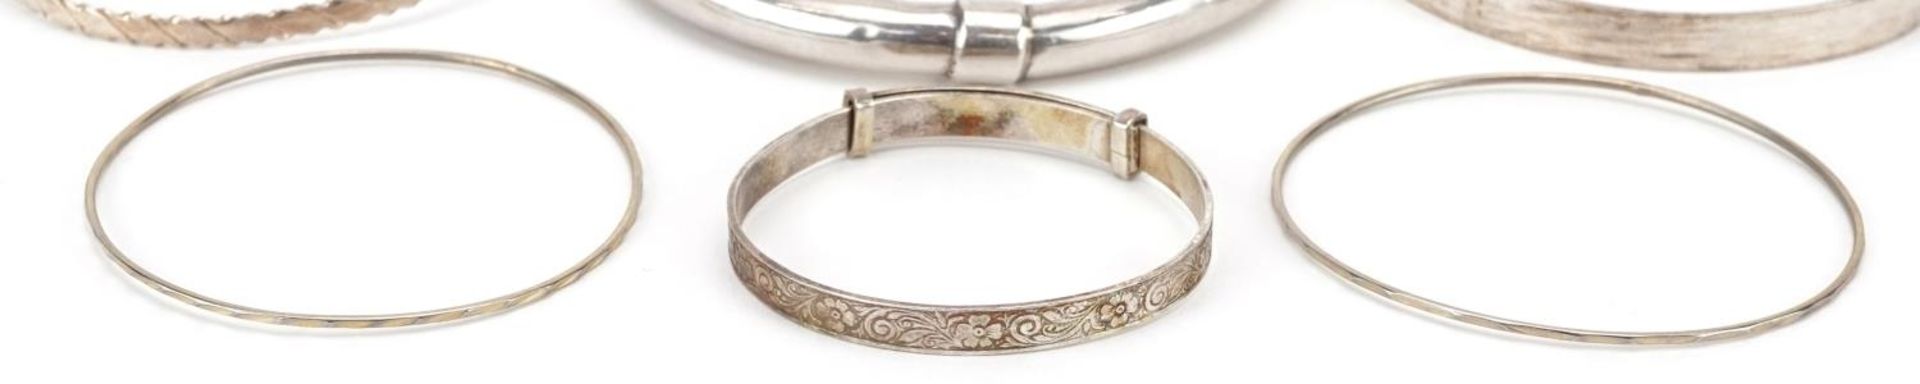 Six silver and white metal bangles including a christening bangle, the largest 8cm in diameter, - Image 3 of 6